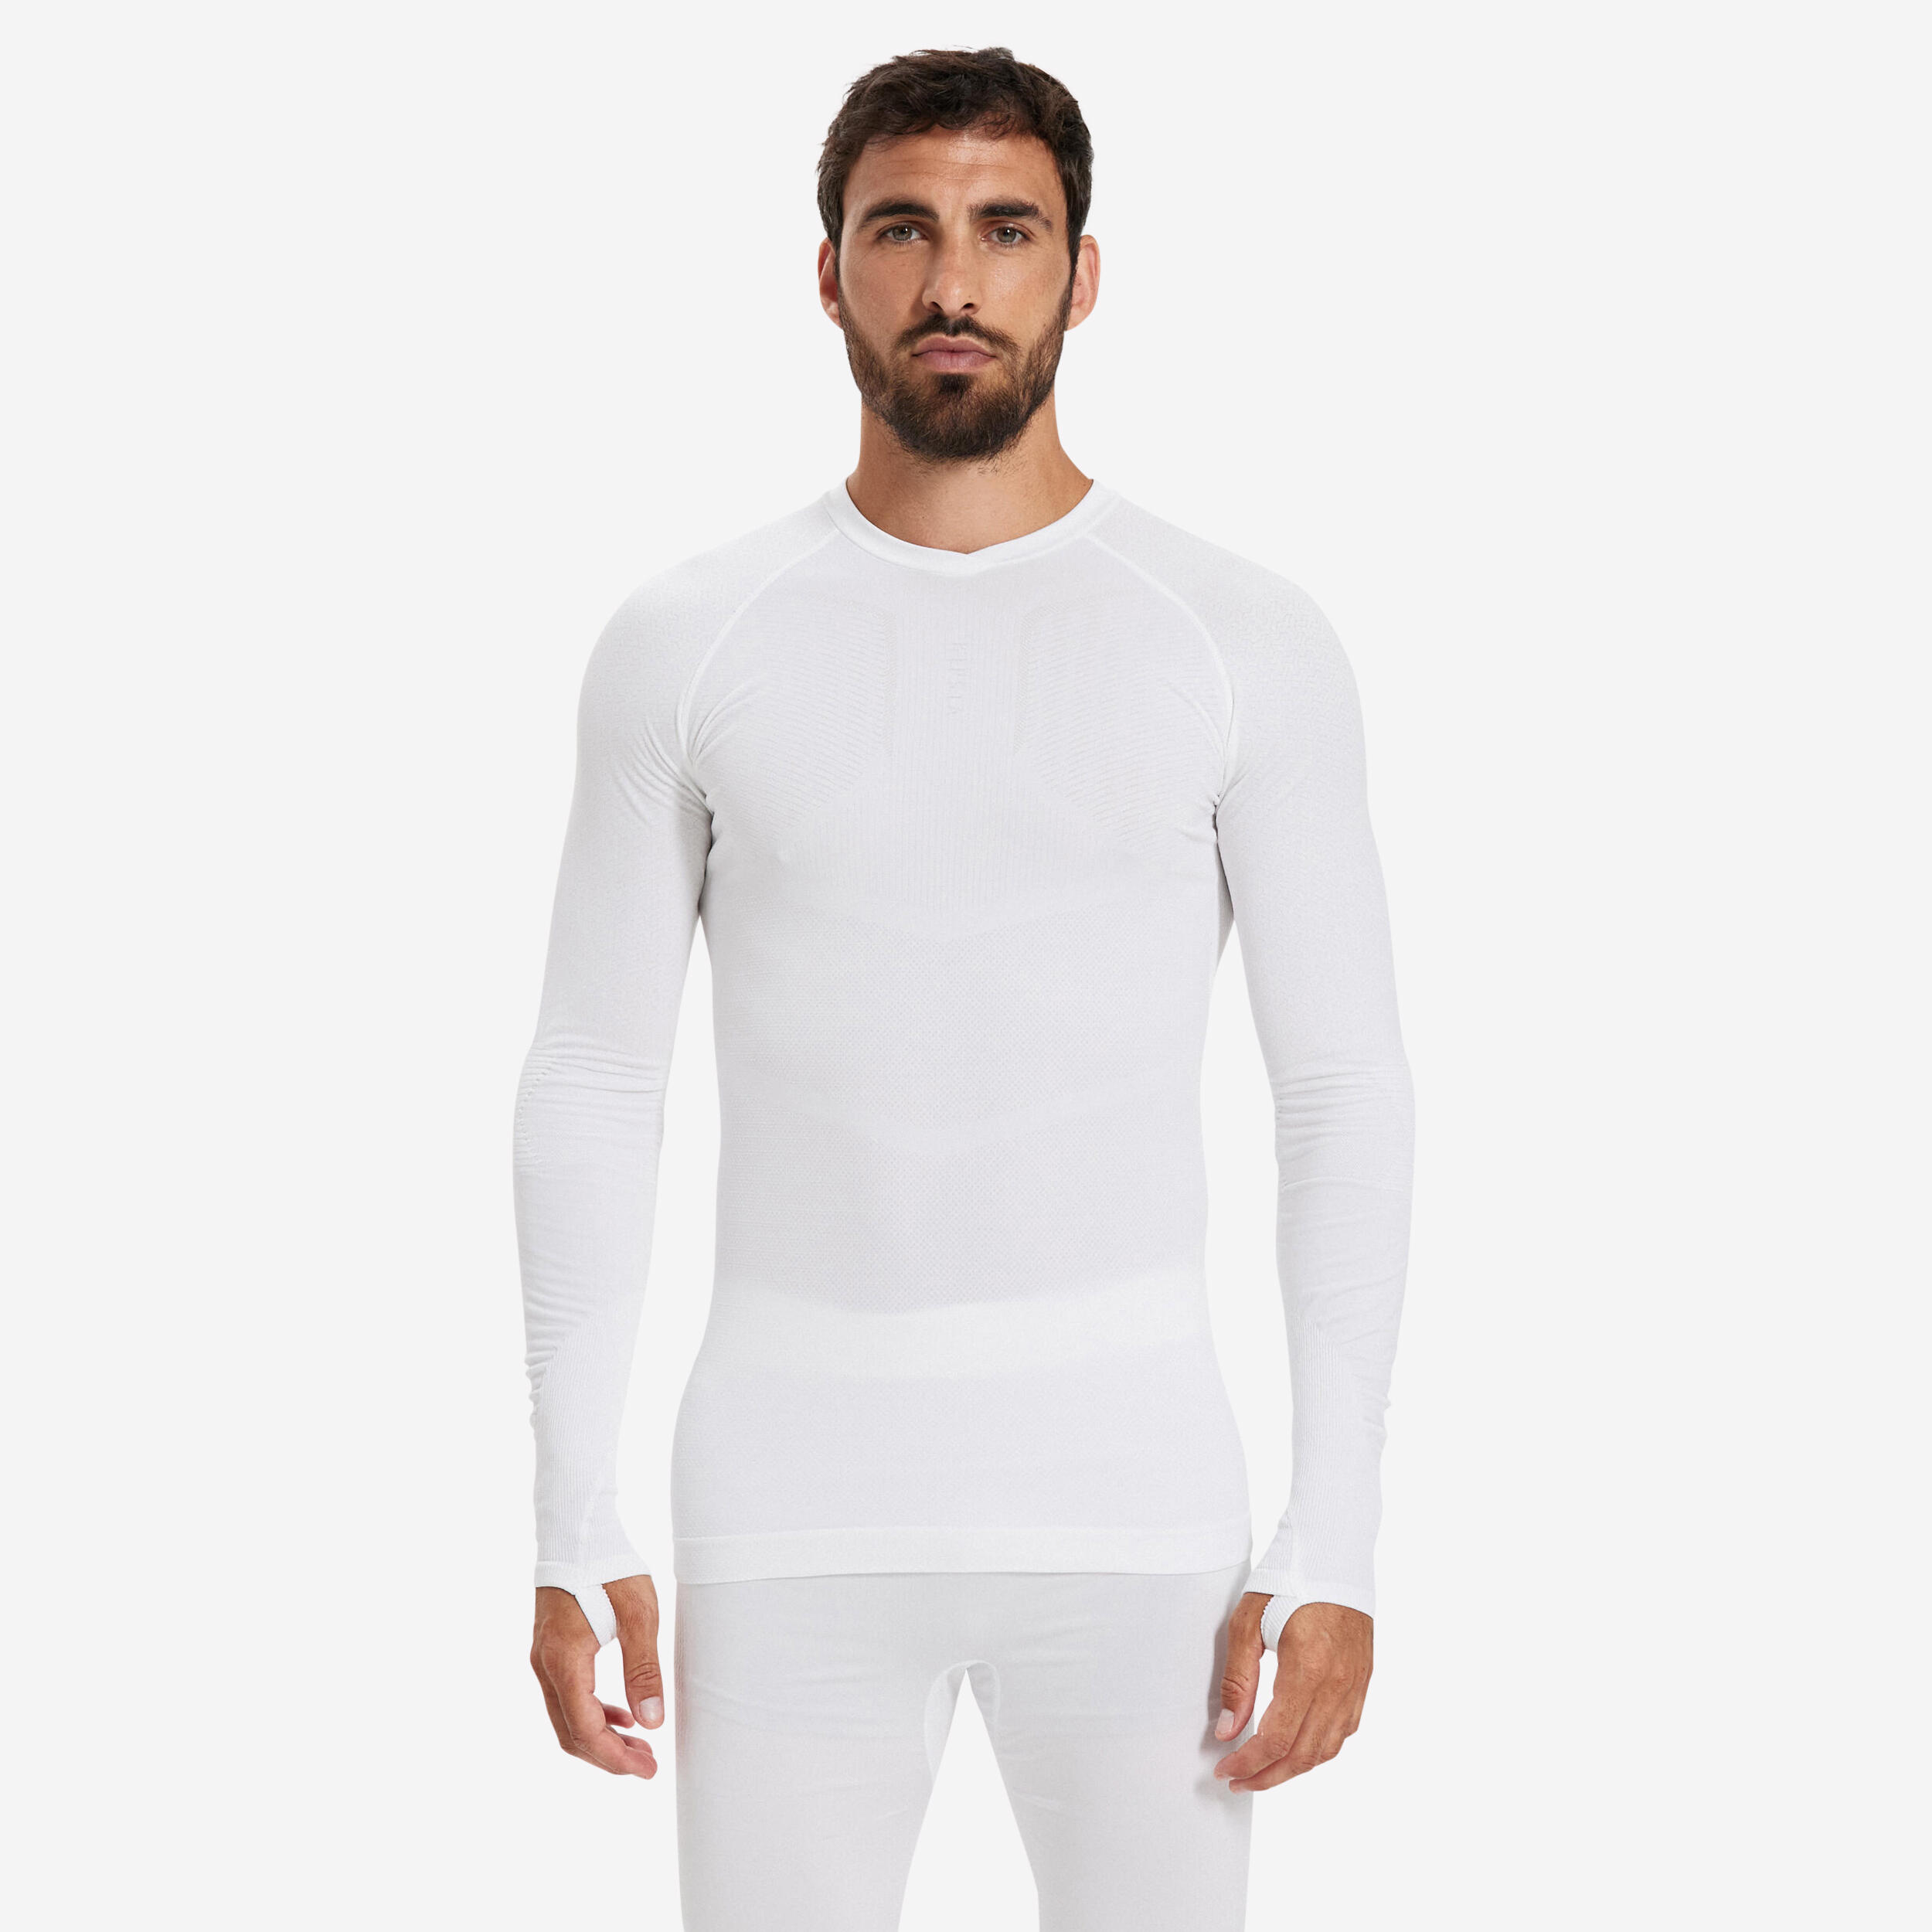 Image of LS Thermal Base Layer Top - Keepdry 500 White